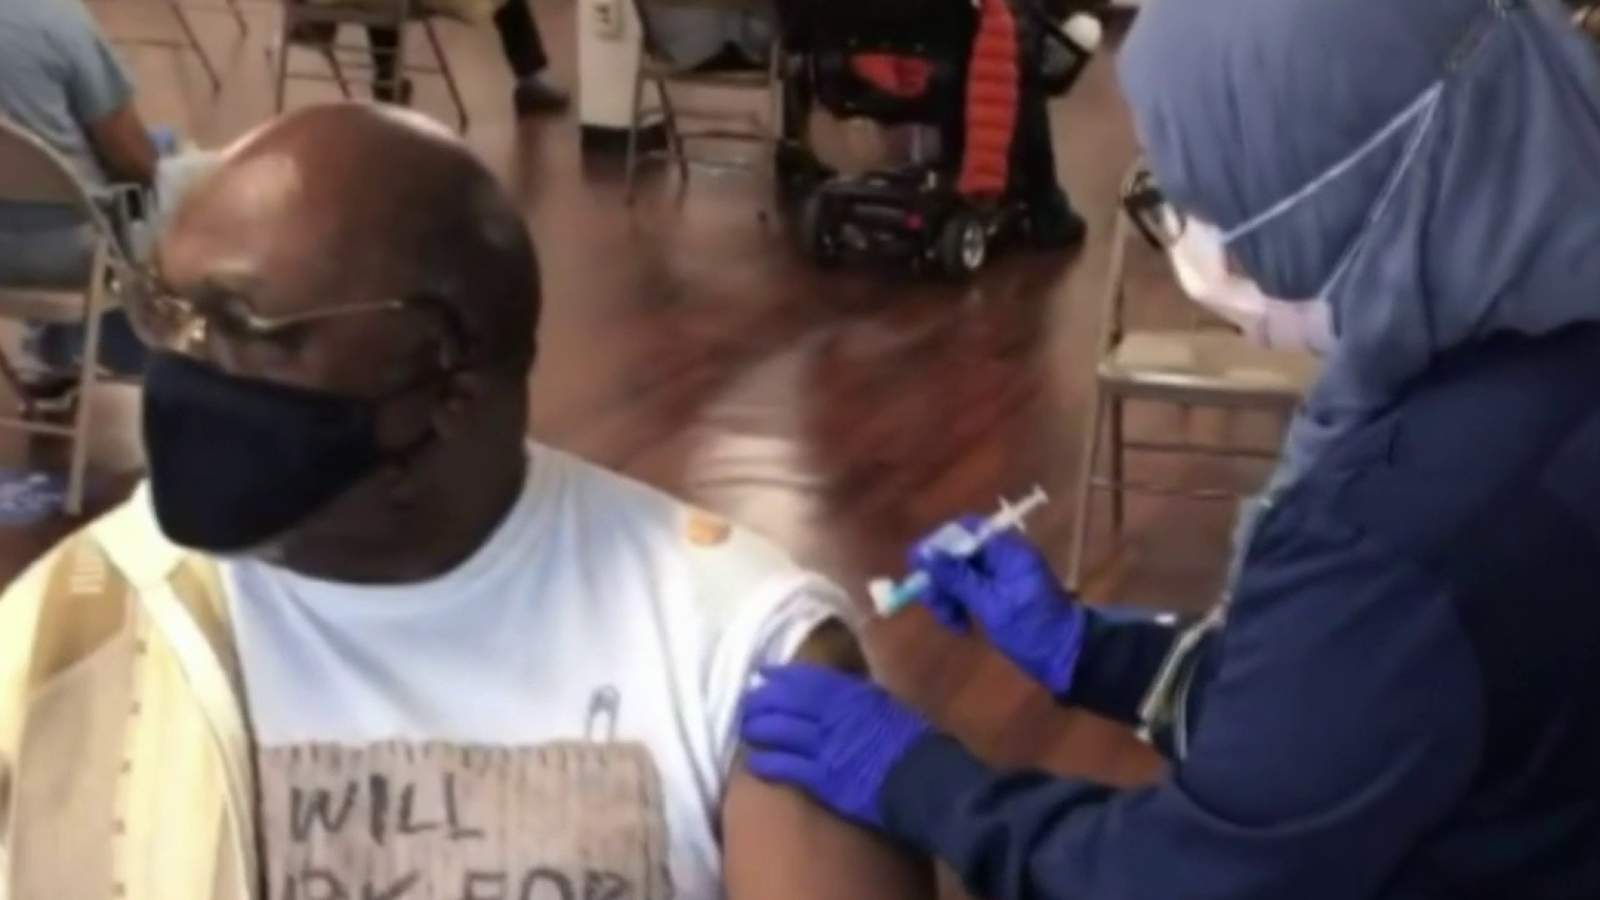 Community leaders in Metro Detroit get vaccinated against COVID-19 to dispel myths